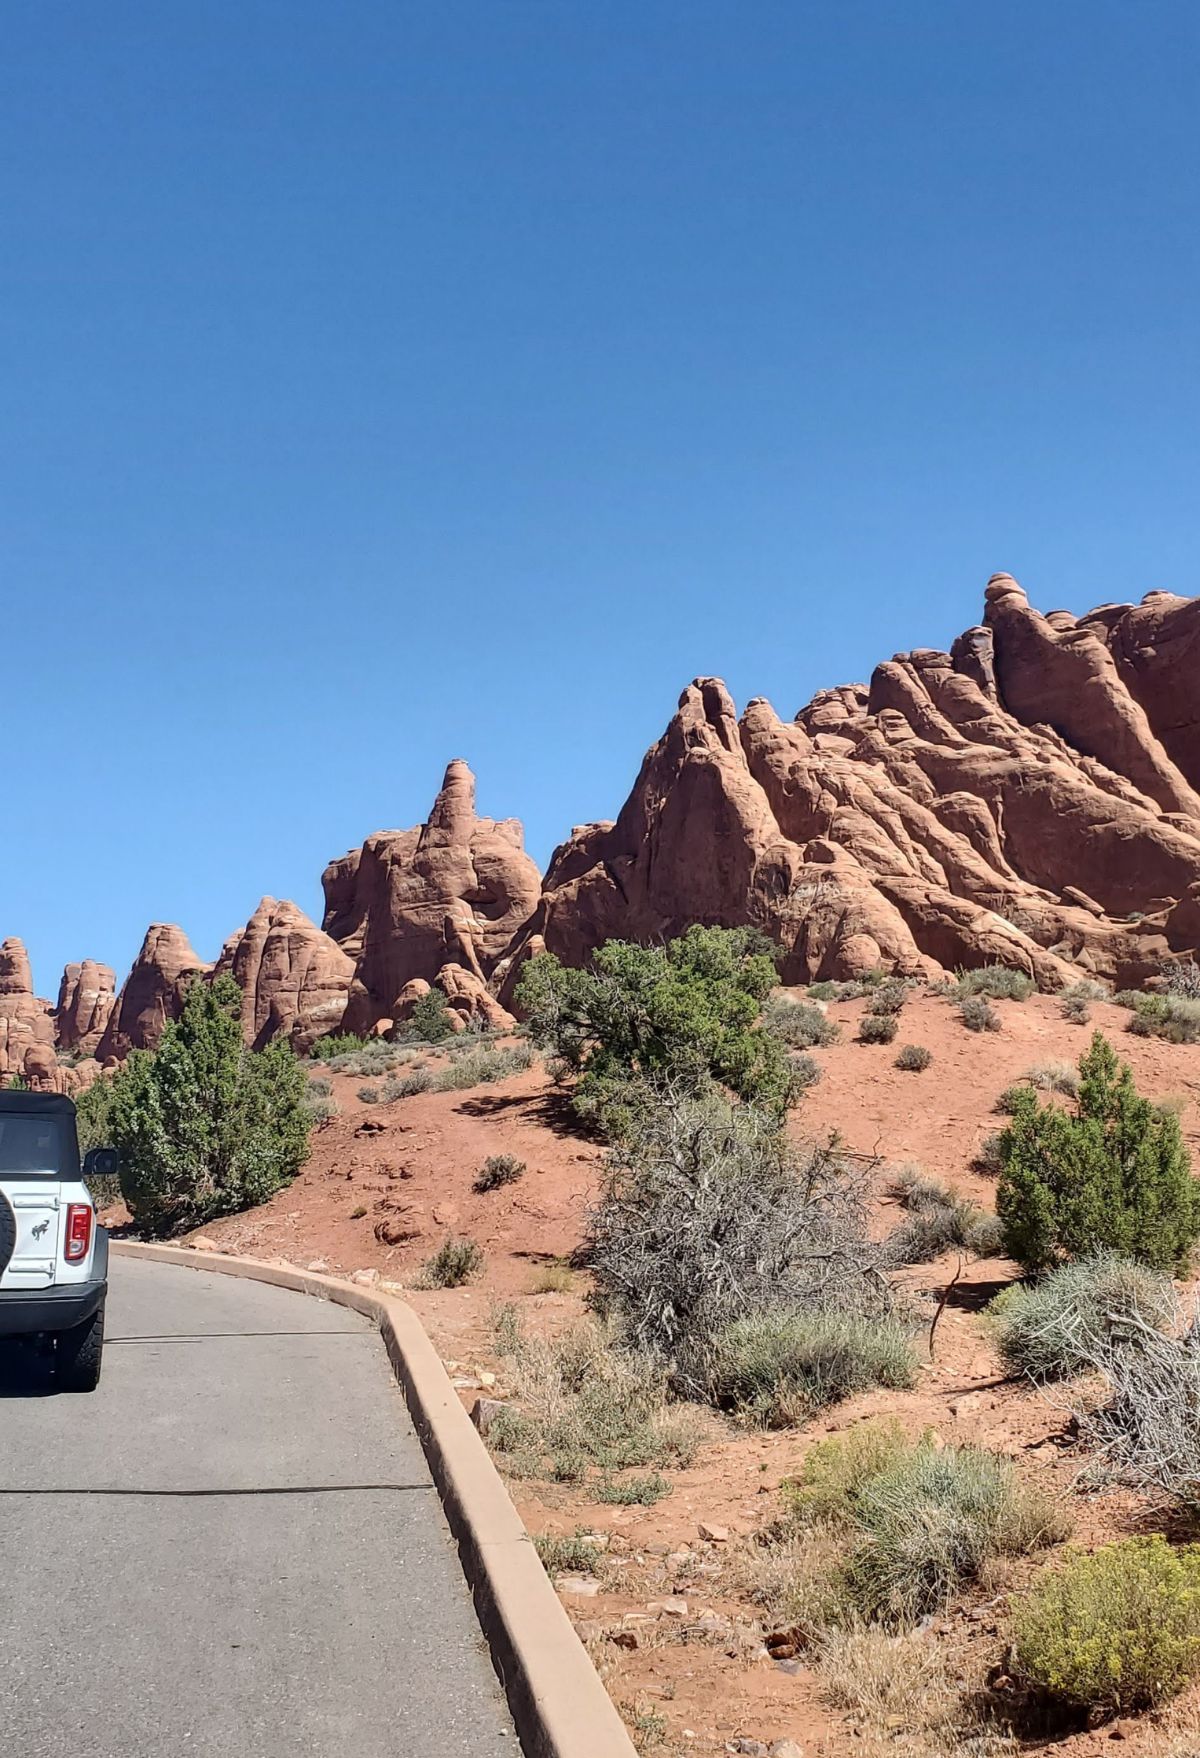 A car driving down a road in arches national park.